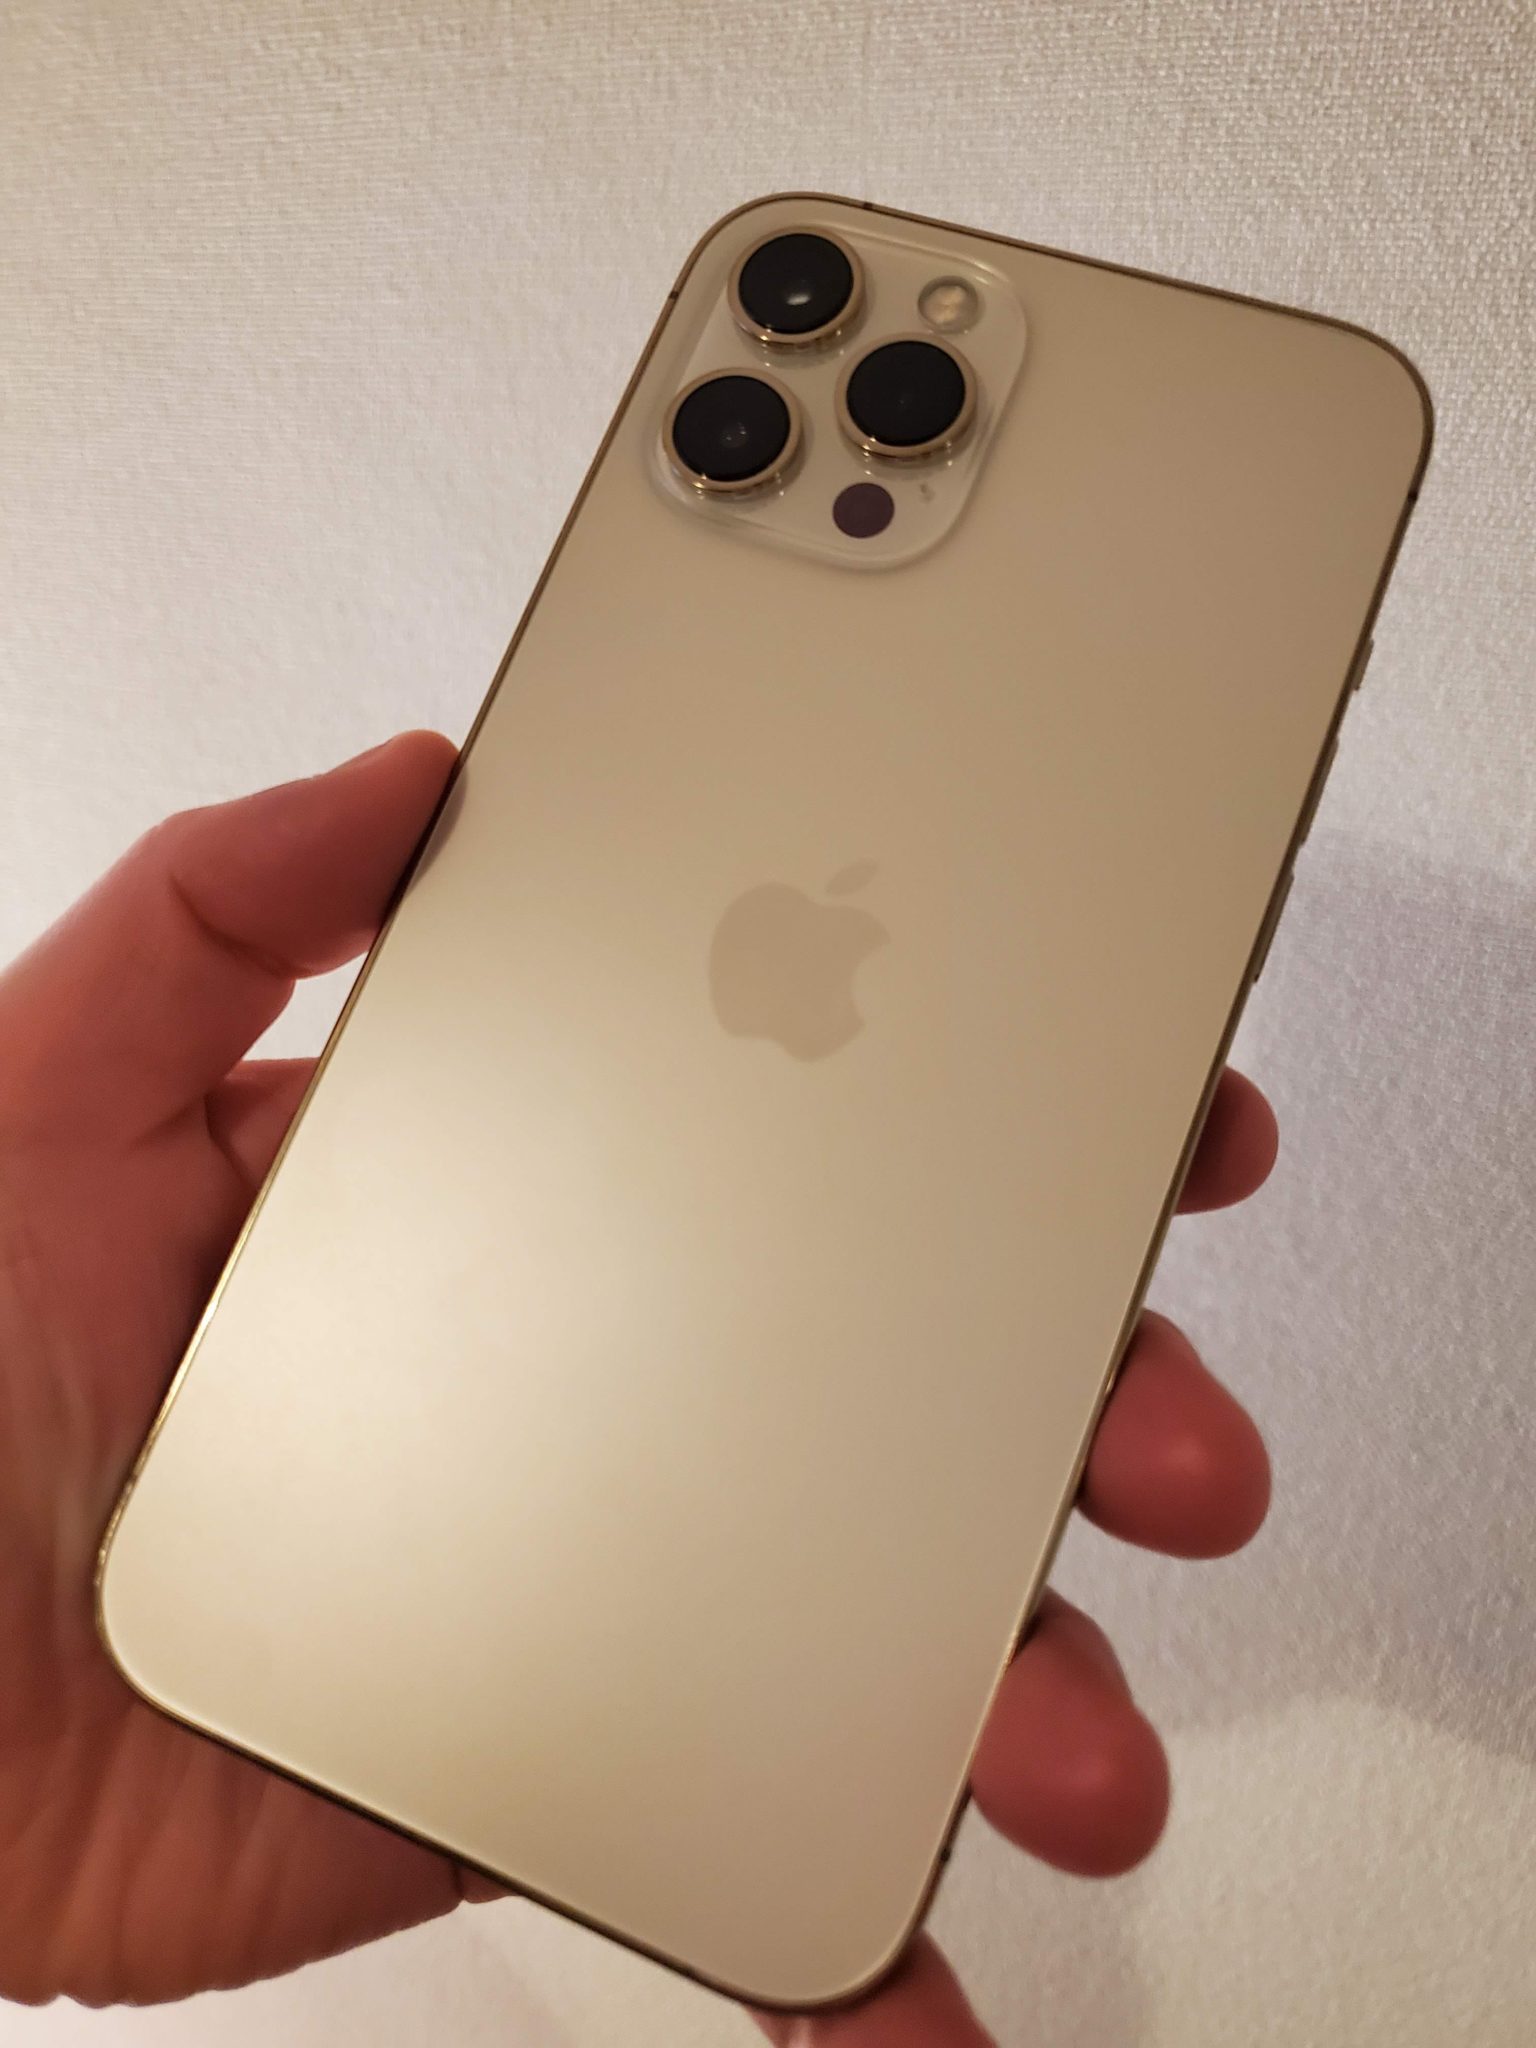 iPhone 12 Pro Max 実機レビュー！価値観が変わった | ダイエット一休